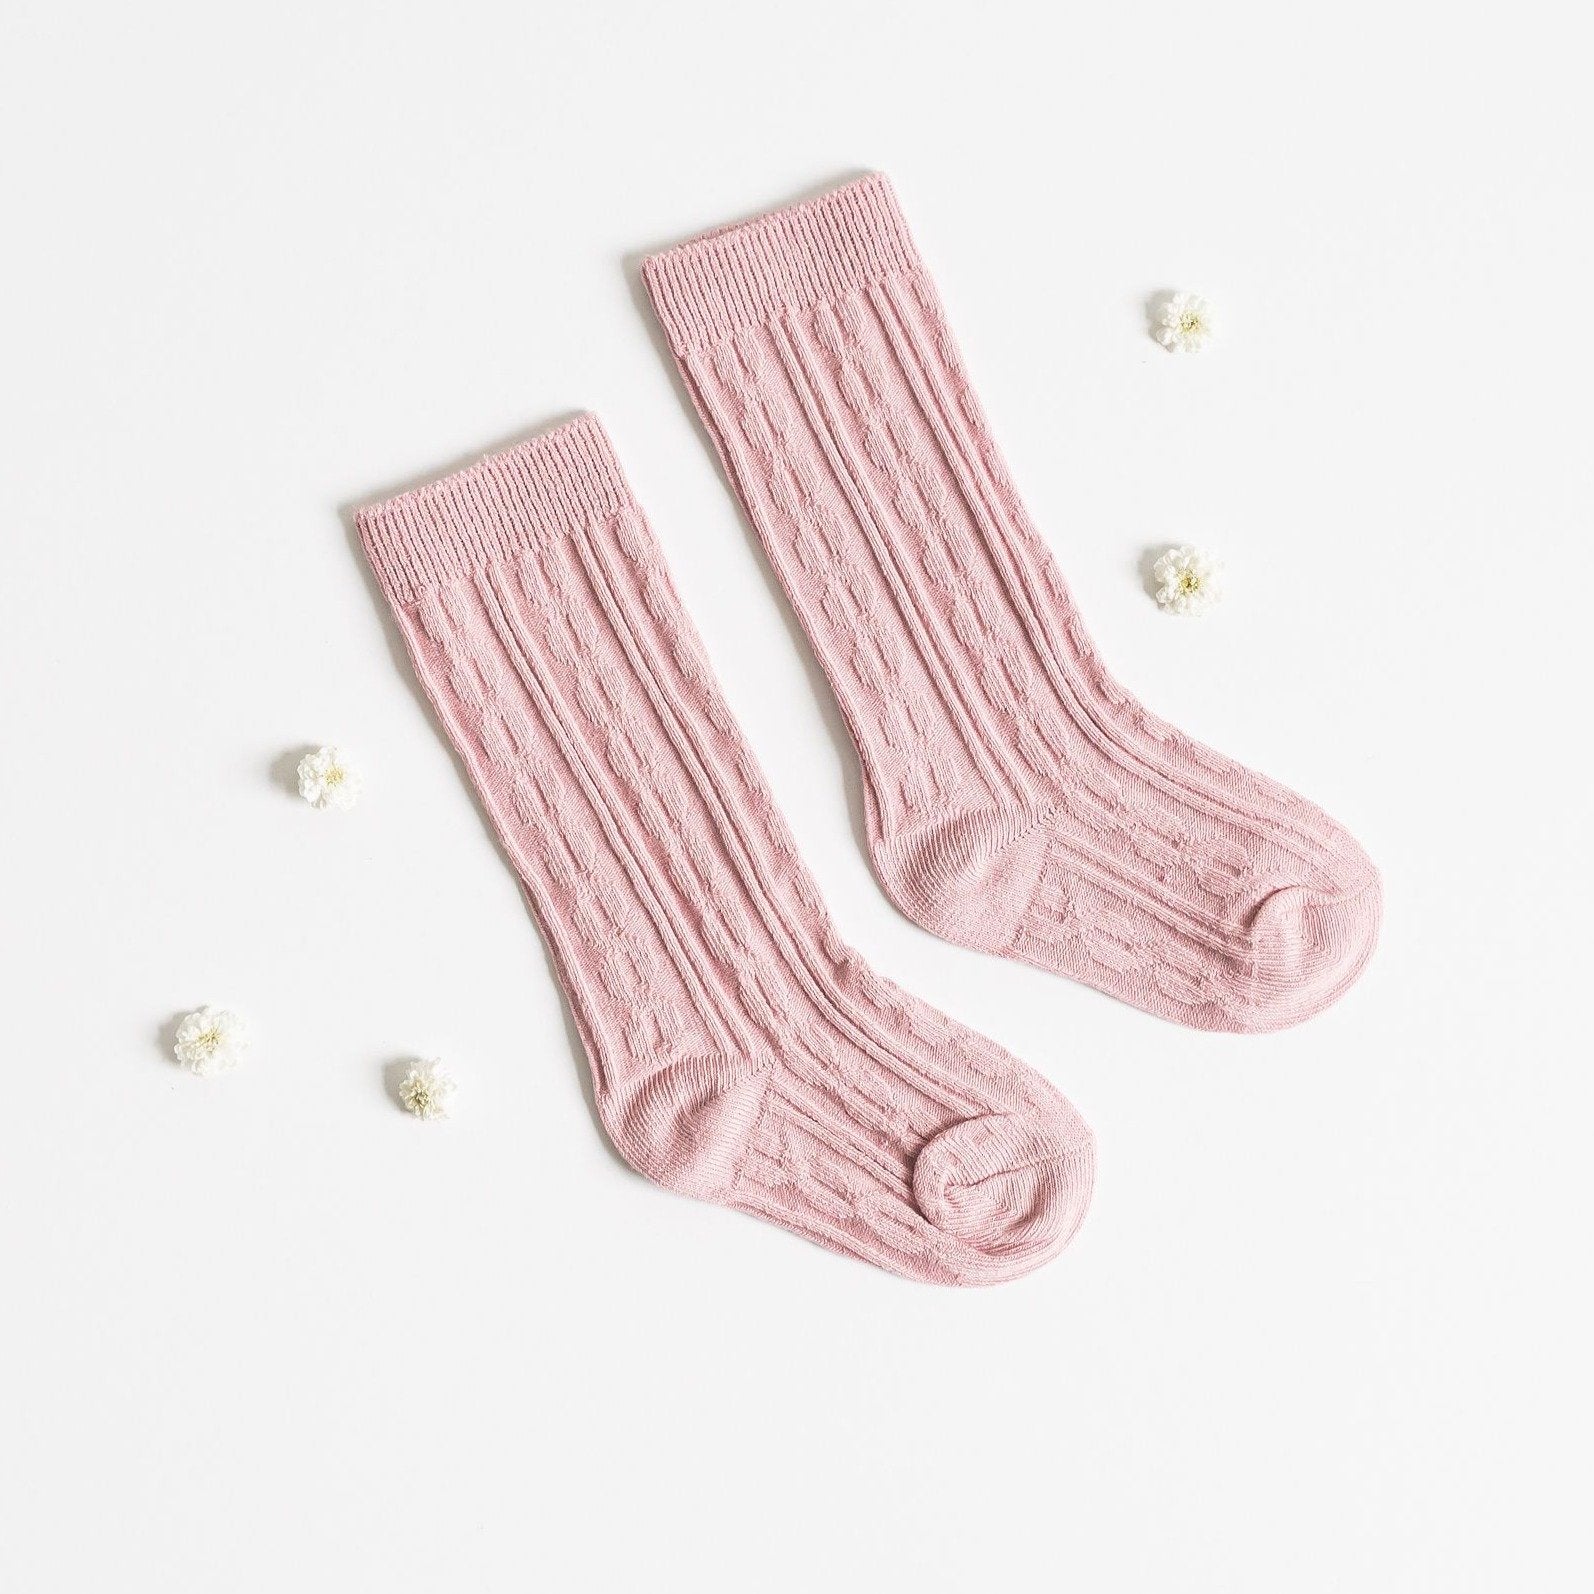 Llb Cable Knit Knee High Socks